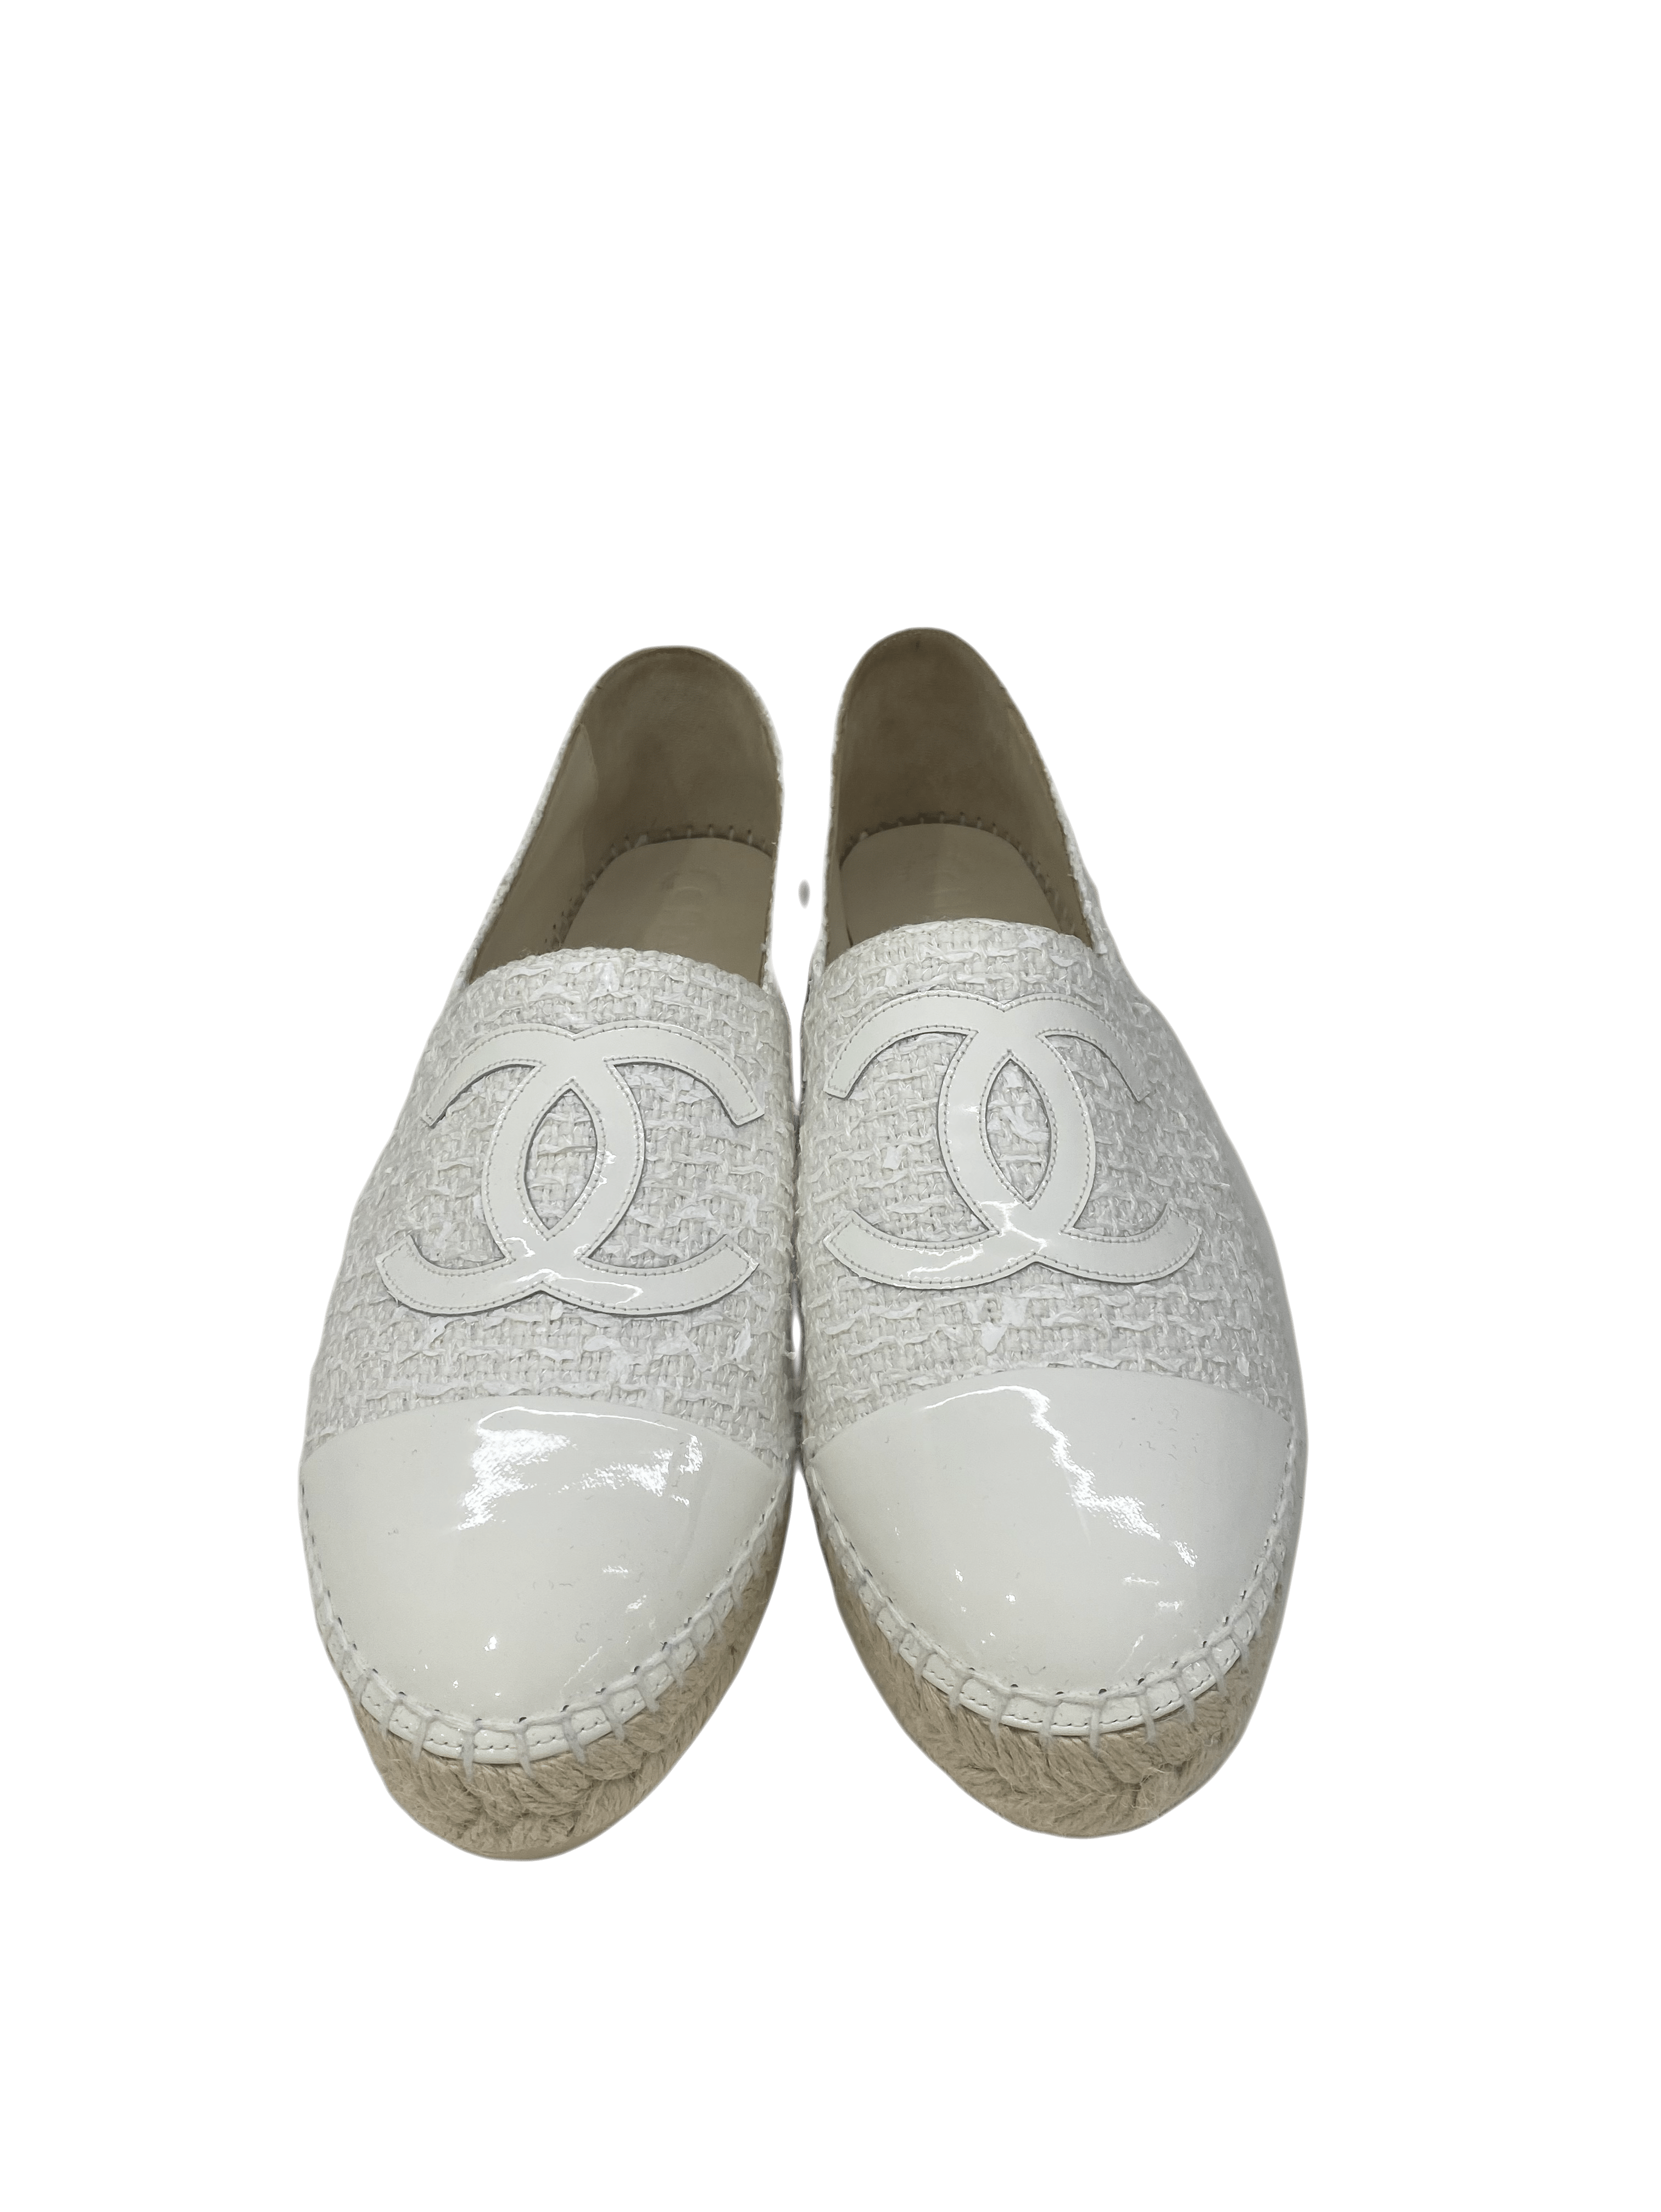 PH Luxury Consignment Chanel White Tweed Espadrilles - Size 41